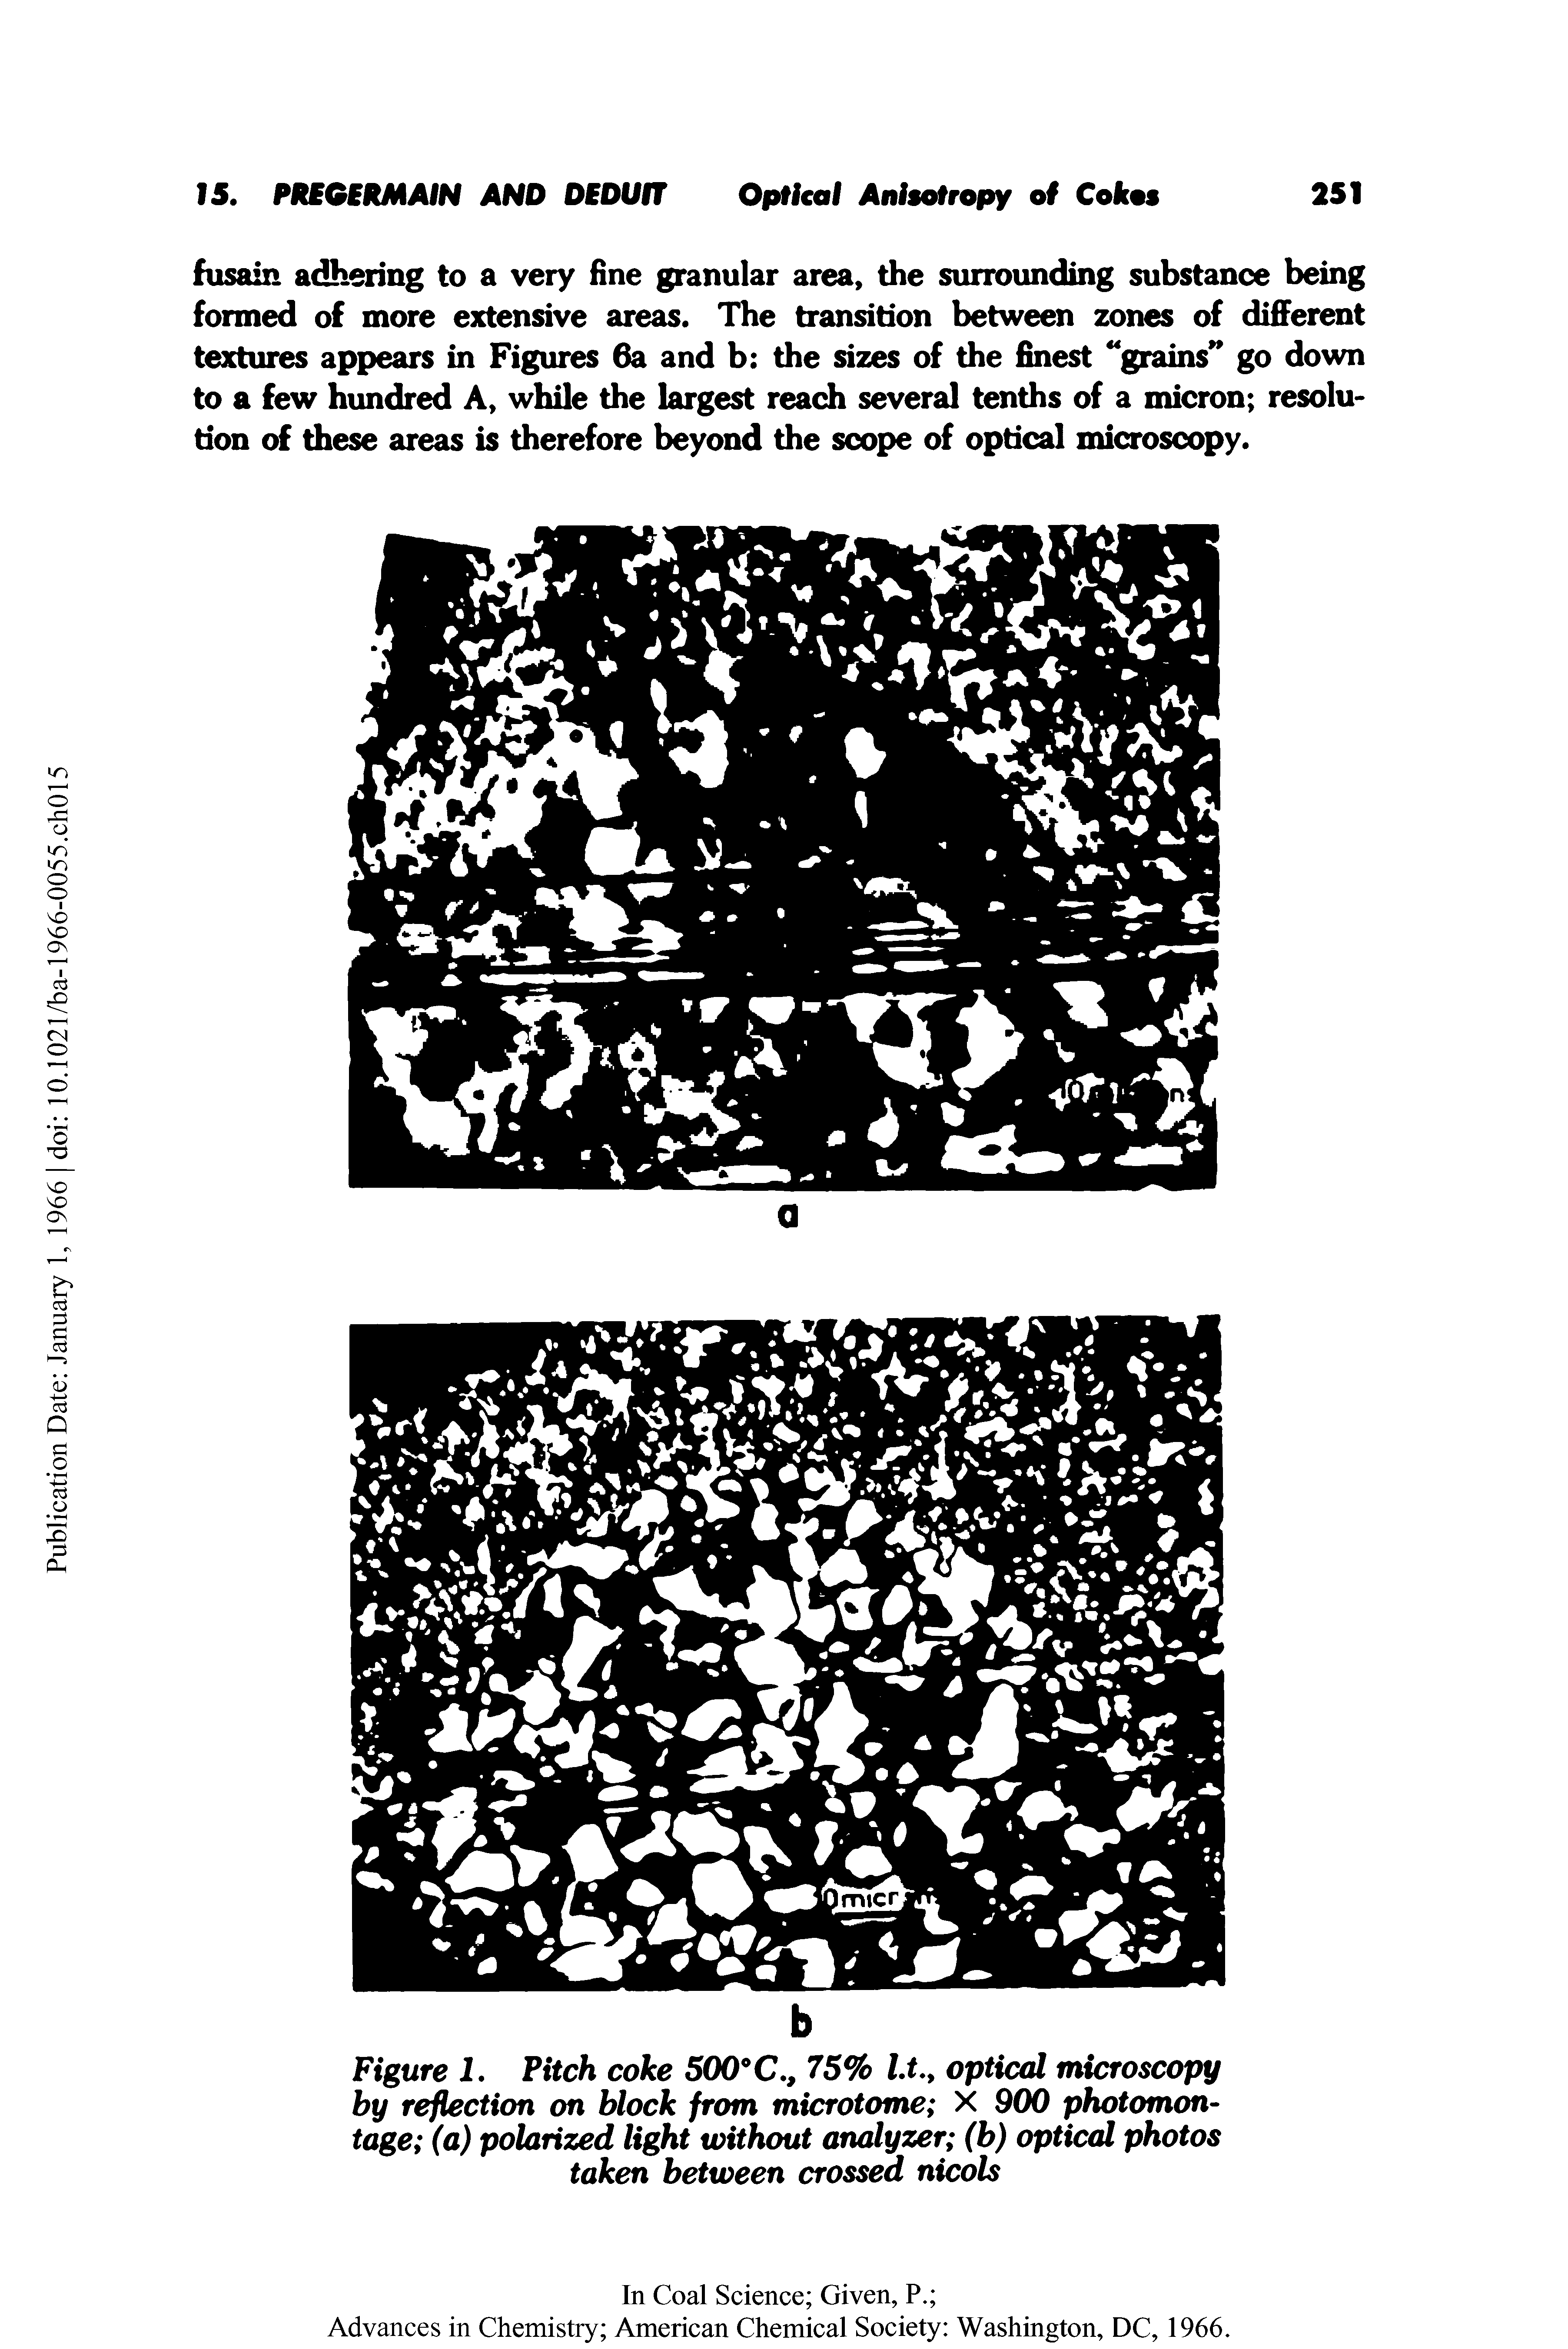 Figure 1. Pitch coke 500°C., 75% l.t., optical microscopy by reflection on block from microtome X 900 photomontage (a) polarized light without analyzer (b) optical photos taken between crossed nicols...